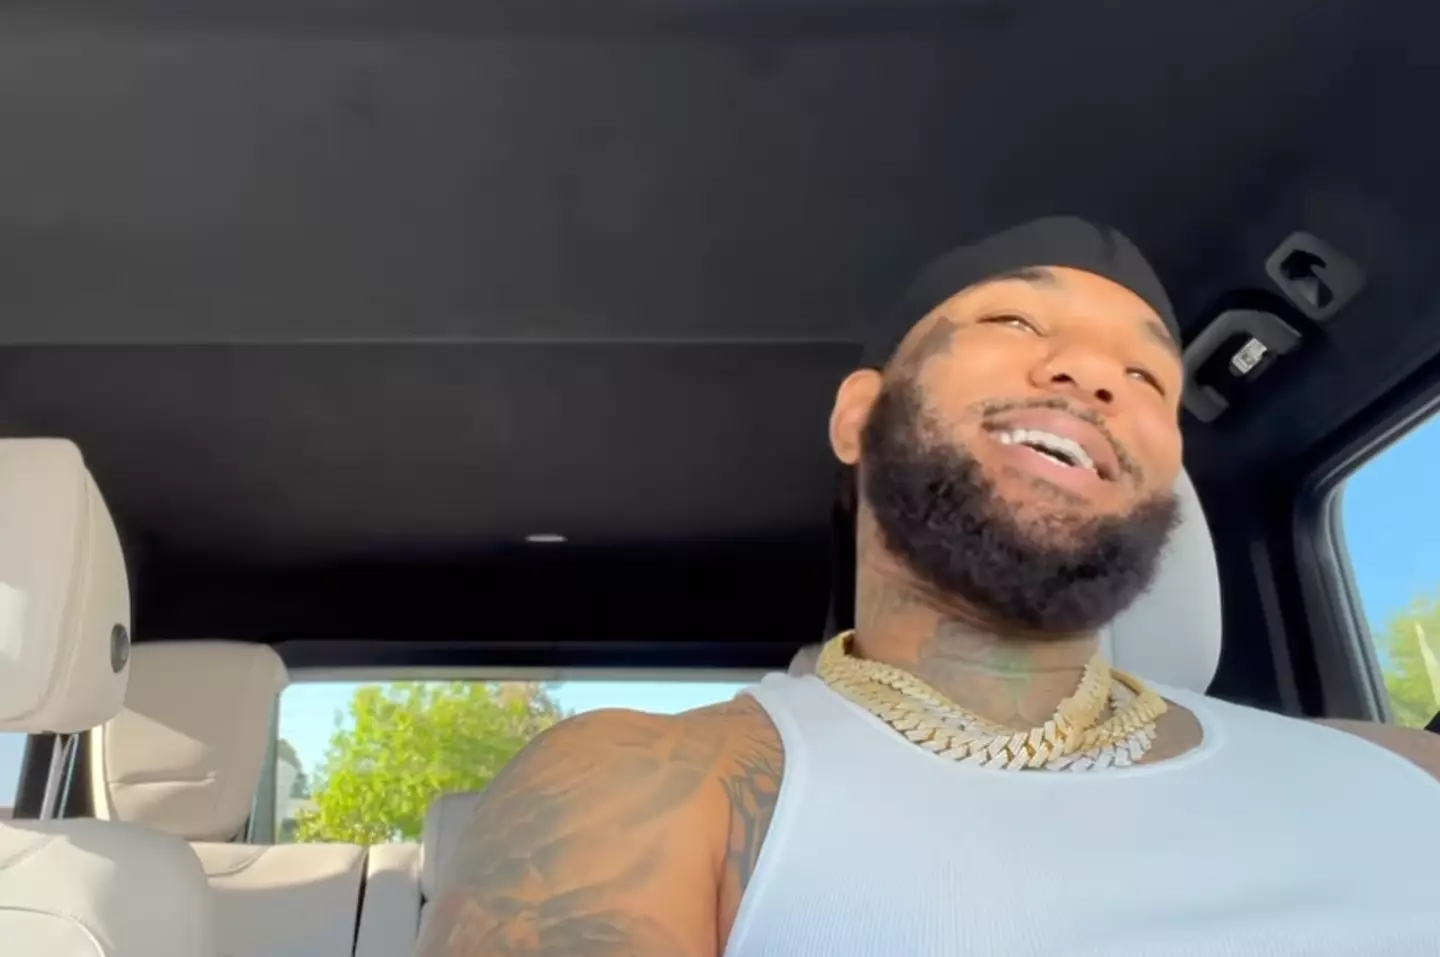 The Game worked with Kanye on their track Eazy.